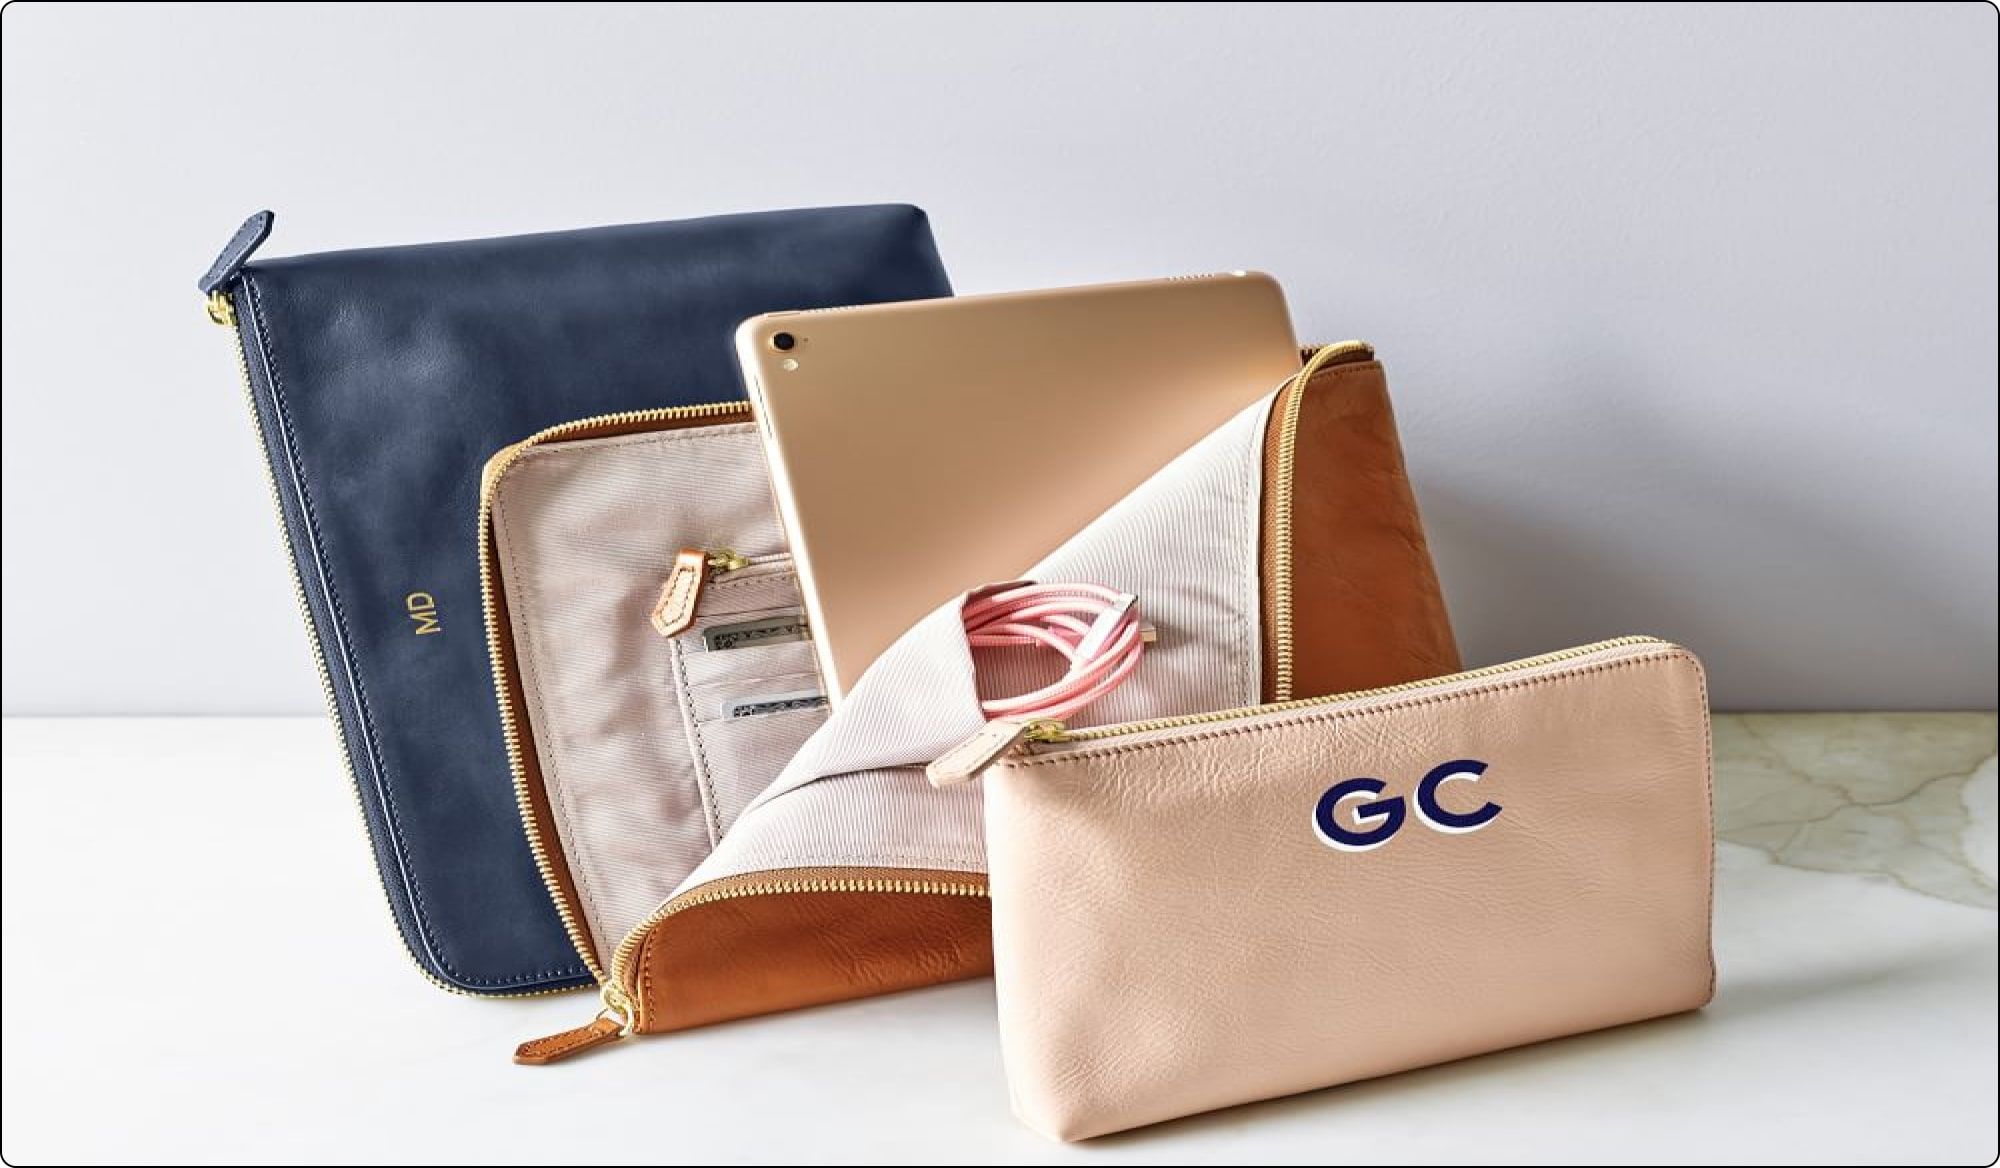 commute clutch Gifts for Administrative Assistants with personalization as company gifts